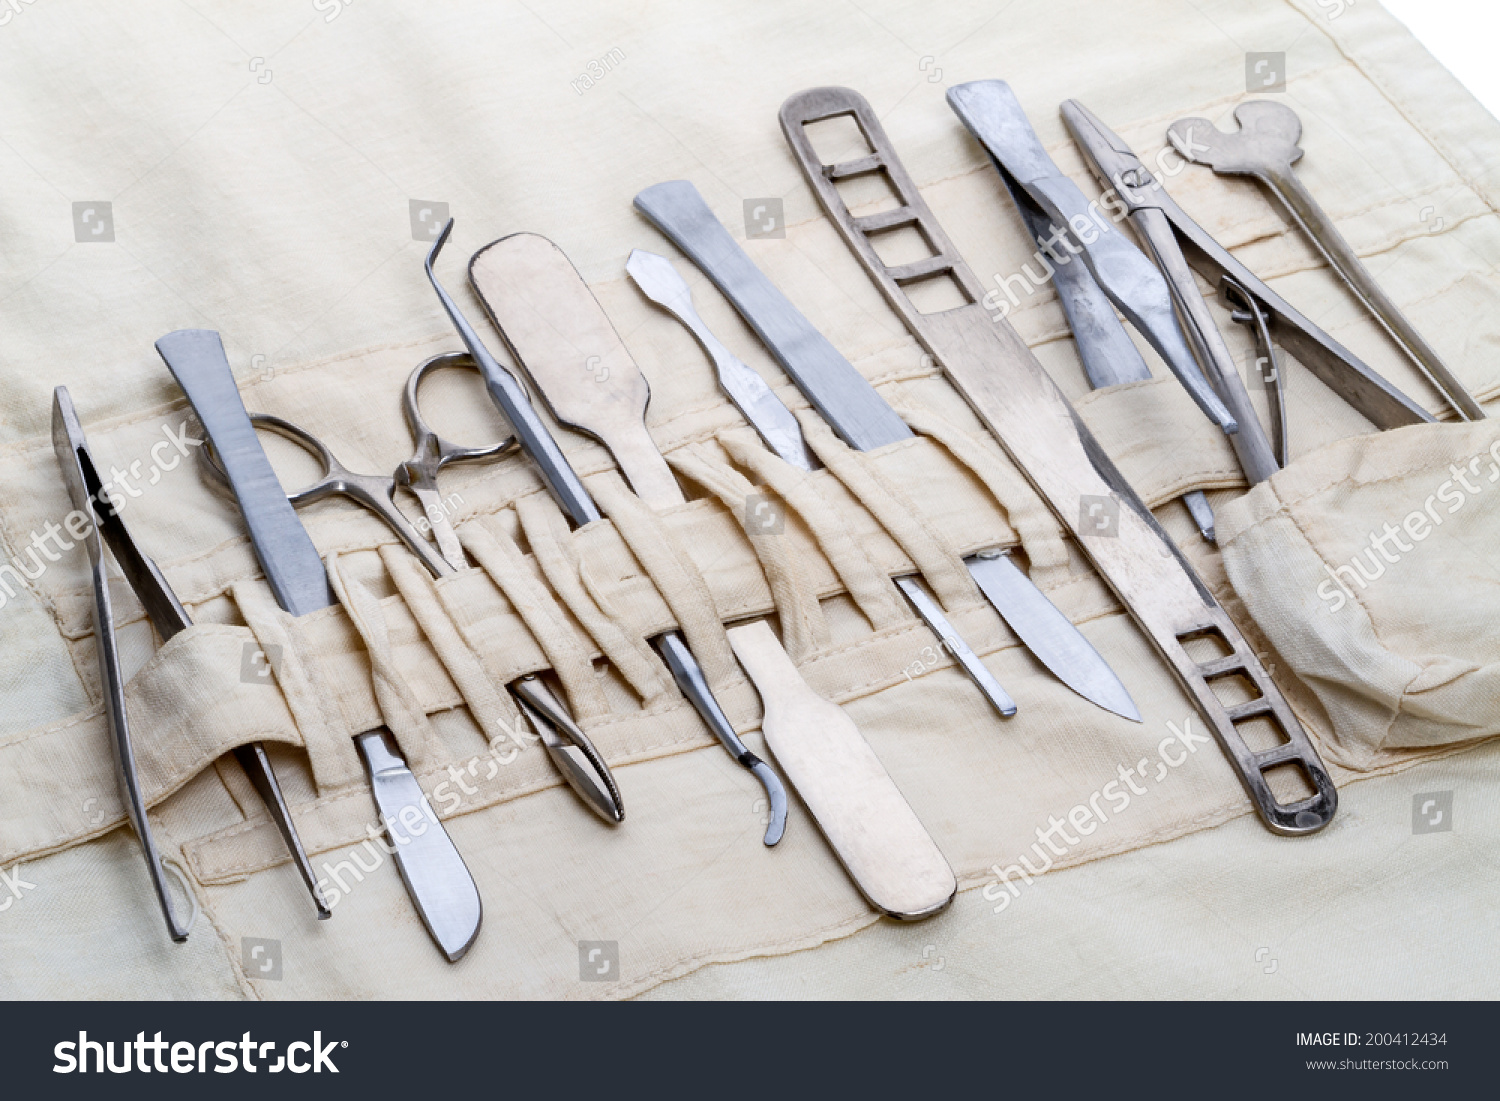 Set Old Vintage Surgical Instruments Scalpel Stock Photo 200412434